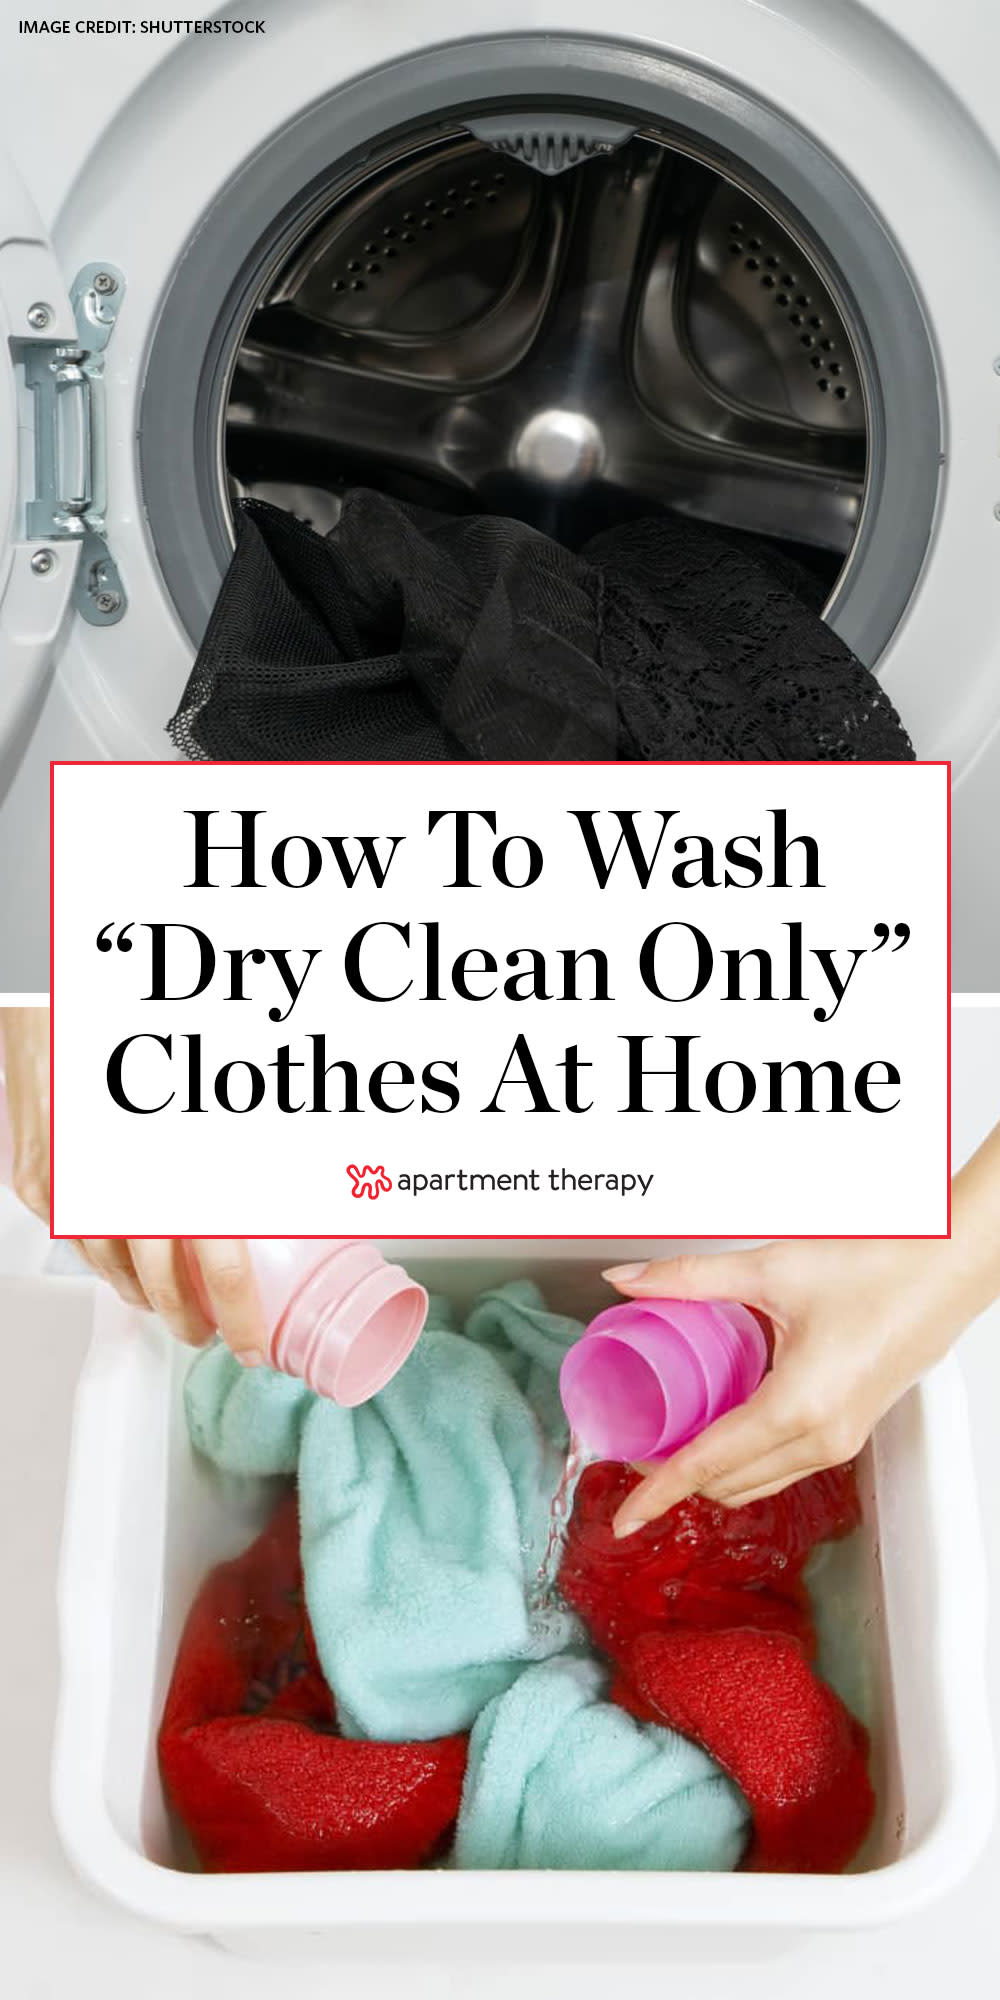 https://cdn.apartmenttherapy.info/image/upload/v1586961168/at/Custom%20Pins/4.15drycleanhome.jpg